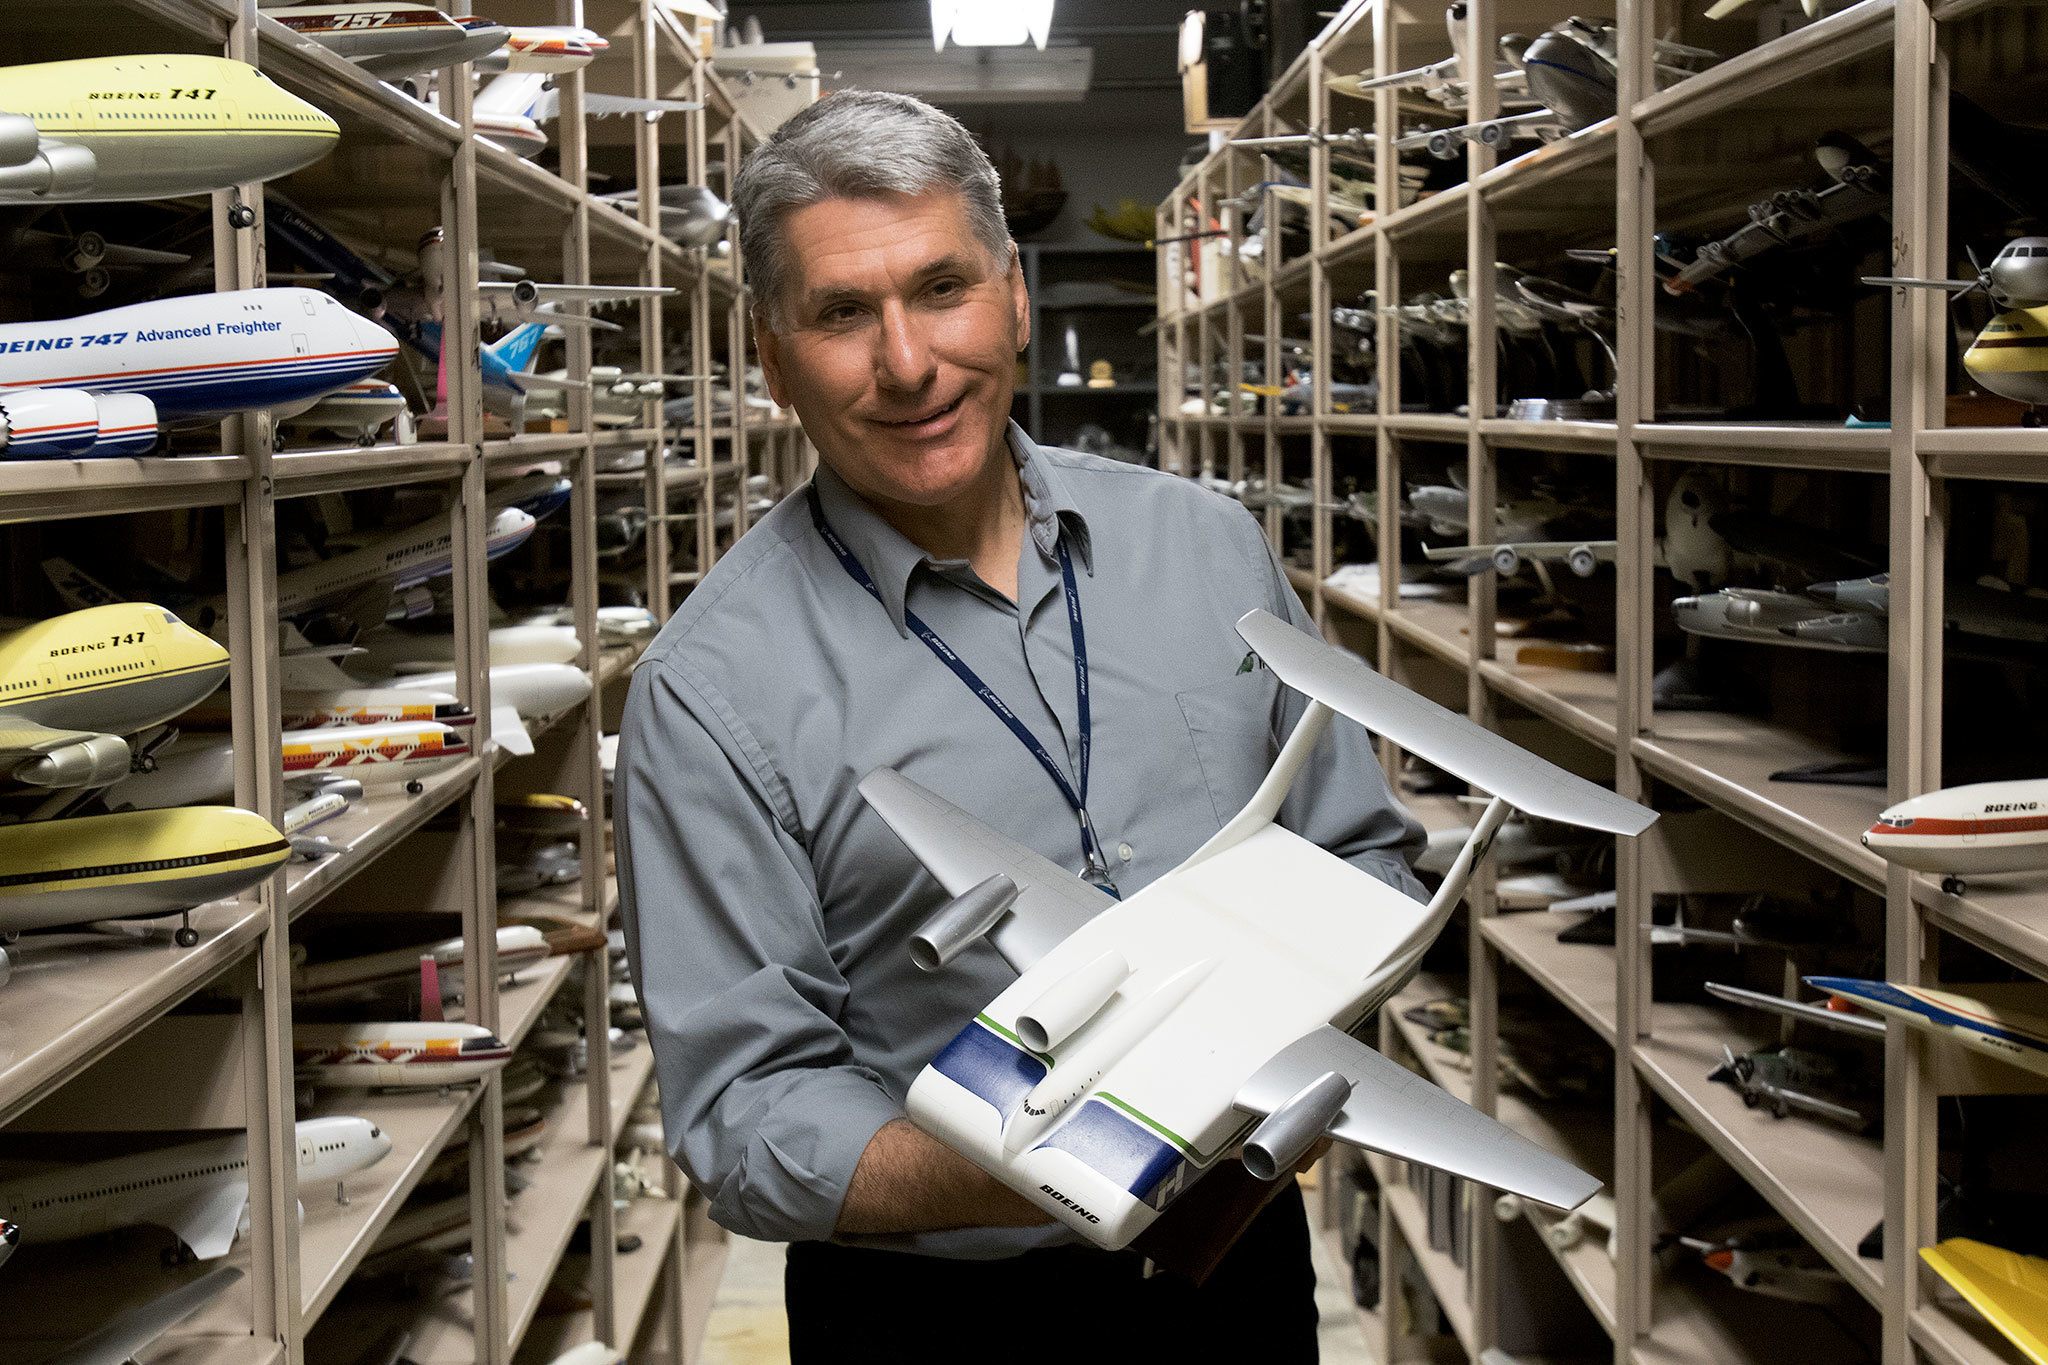 Standing between rows and rows of Boeing models, Michael Lombardi, Director of Boeing Archives at Boeing Corporate Archives, holds a model of the Boeing Model 754 “Husky” Concept plane circa 1974 on Tuesday, April 12, 2016 in Bellevue, Wa. ( Andy Bronson / The Herald )